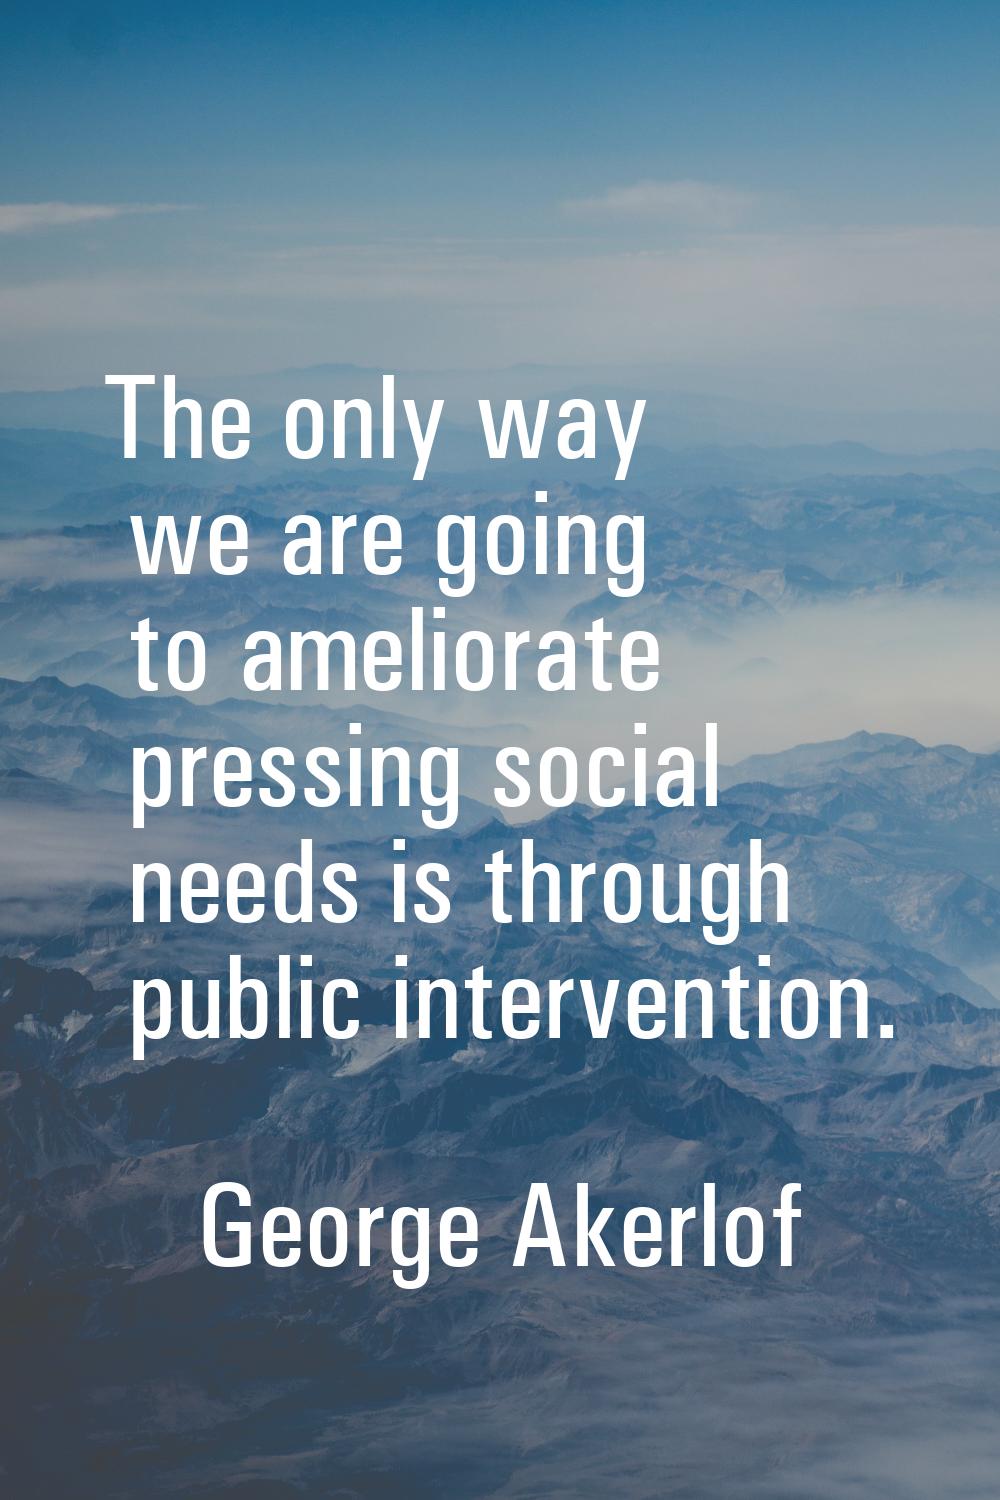 The only way we are going to ameliorate pressing social needs is through public intervention.